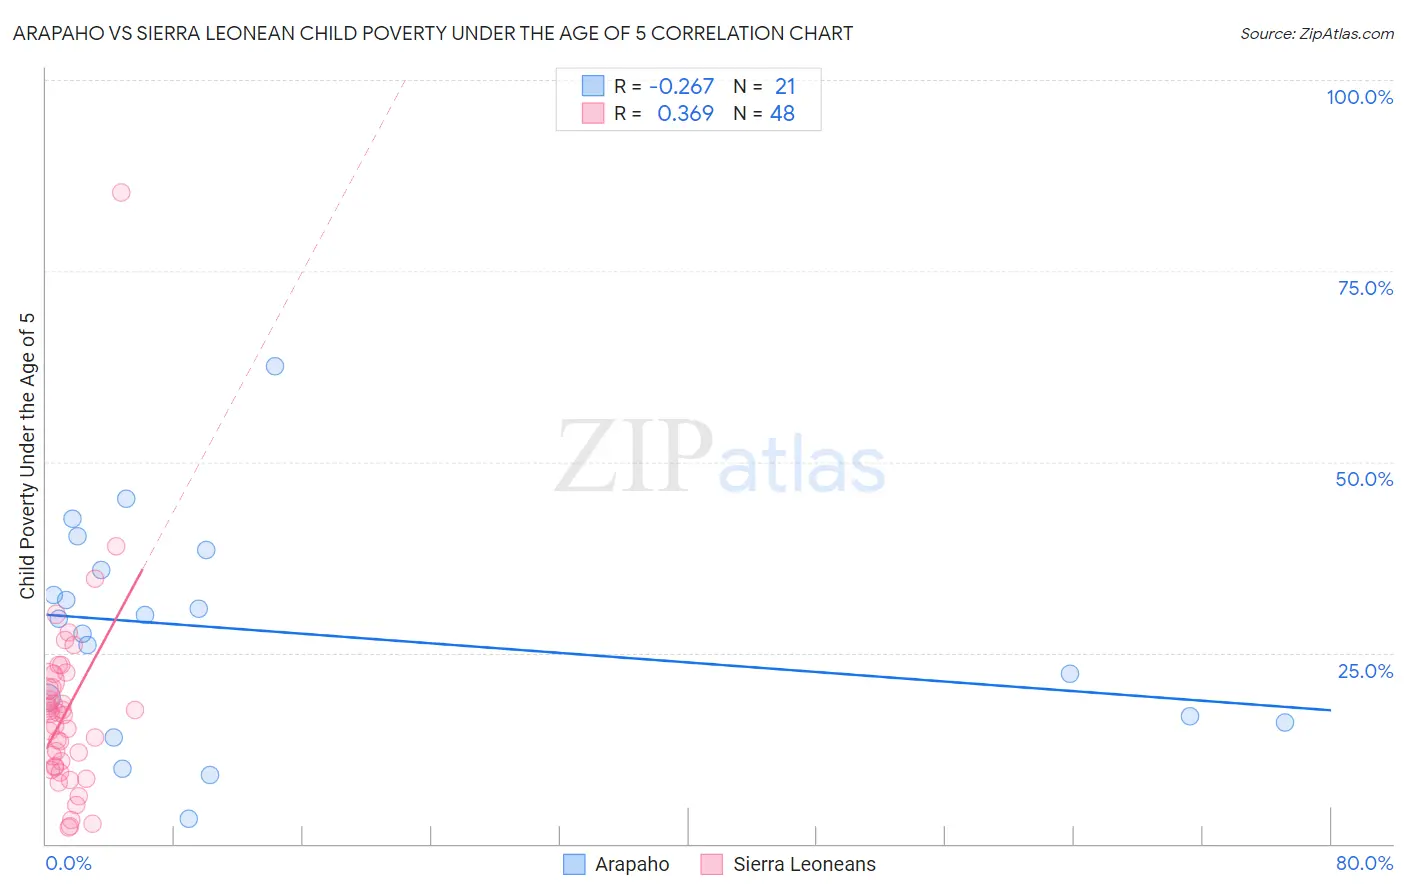 Arapaho vs Sierra Leonean Child Poverty Under the Age of 5